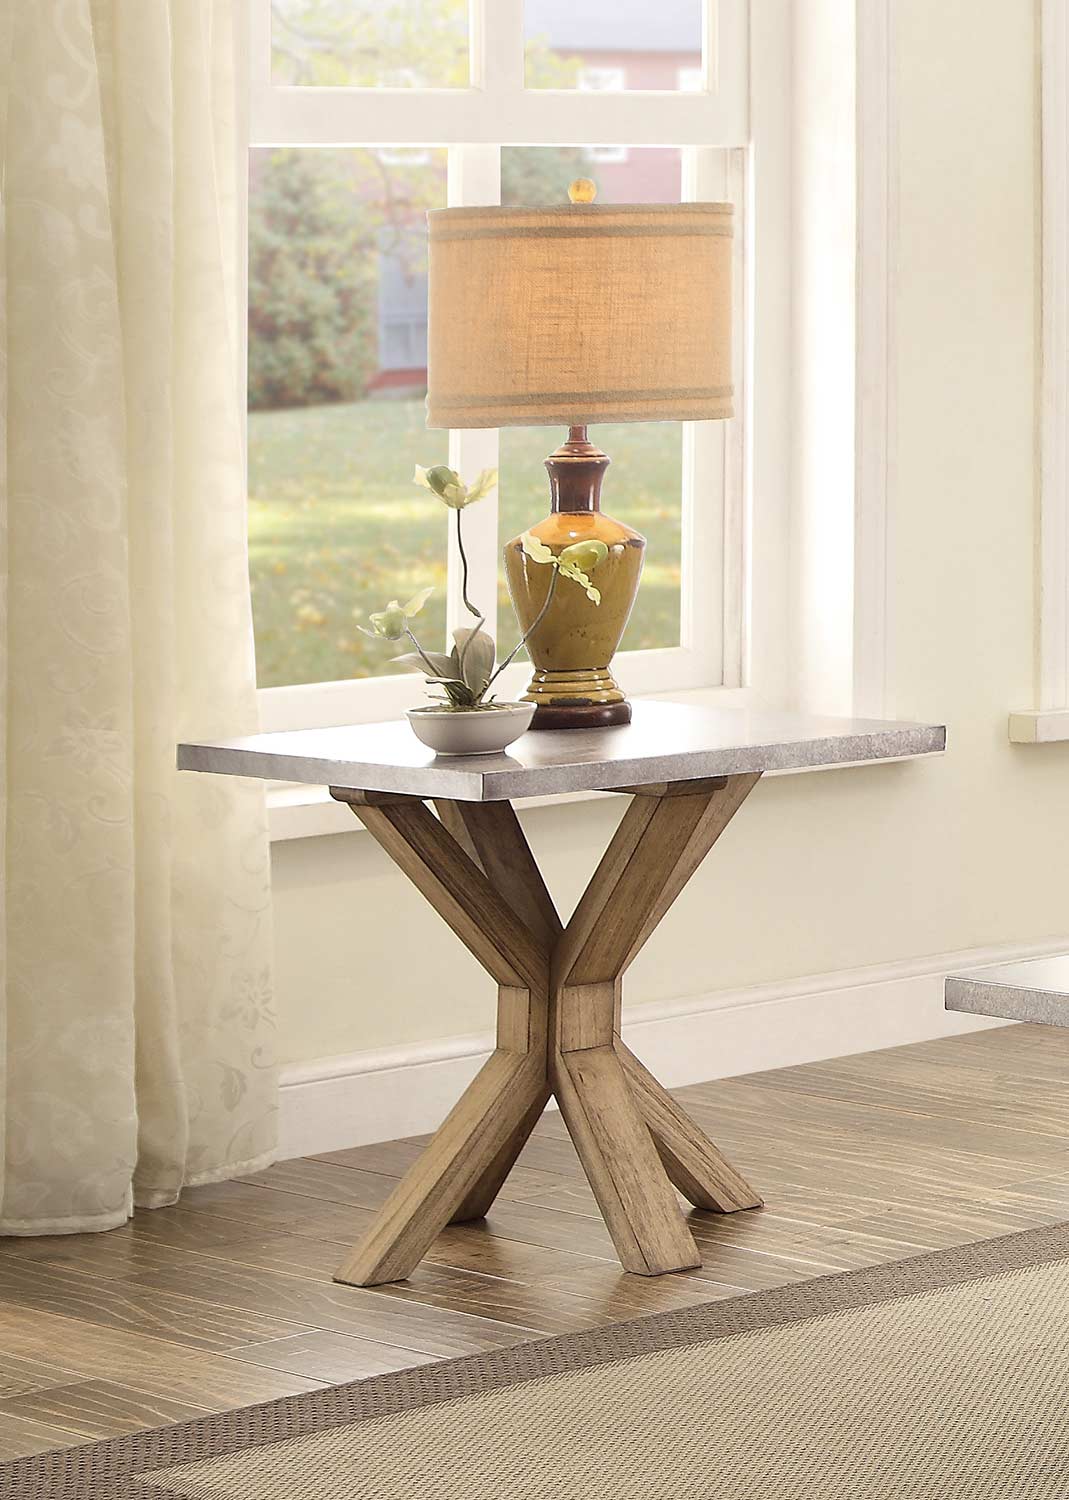 Homelegance Luella End Table - Weathered Oak with Zinc Table Top